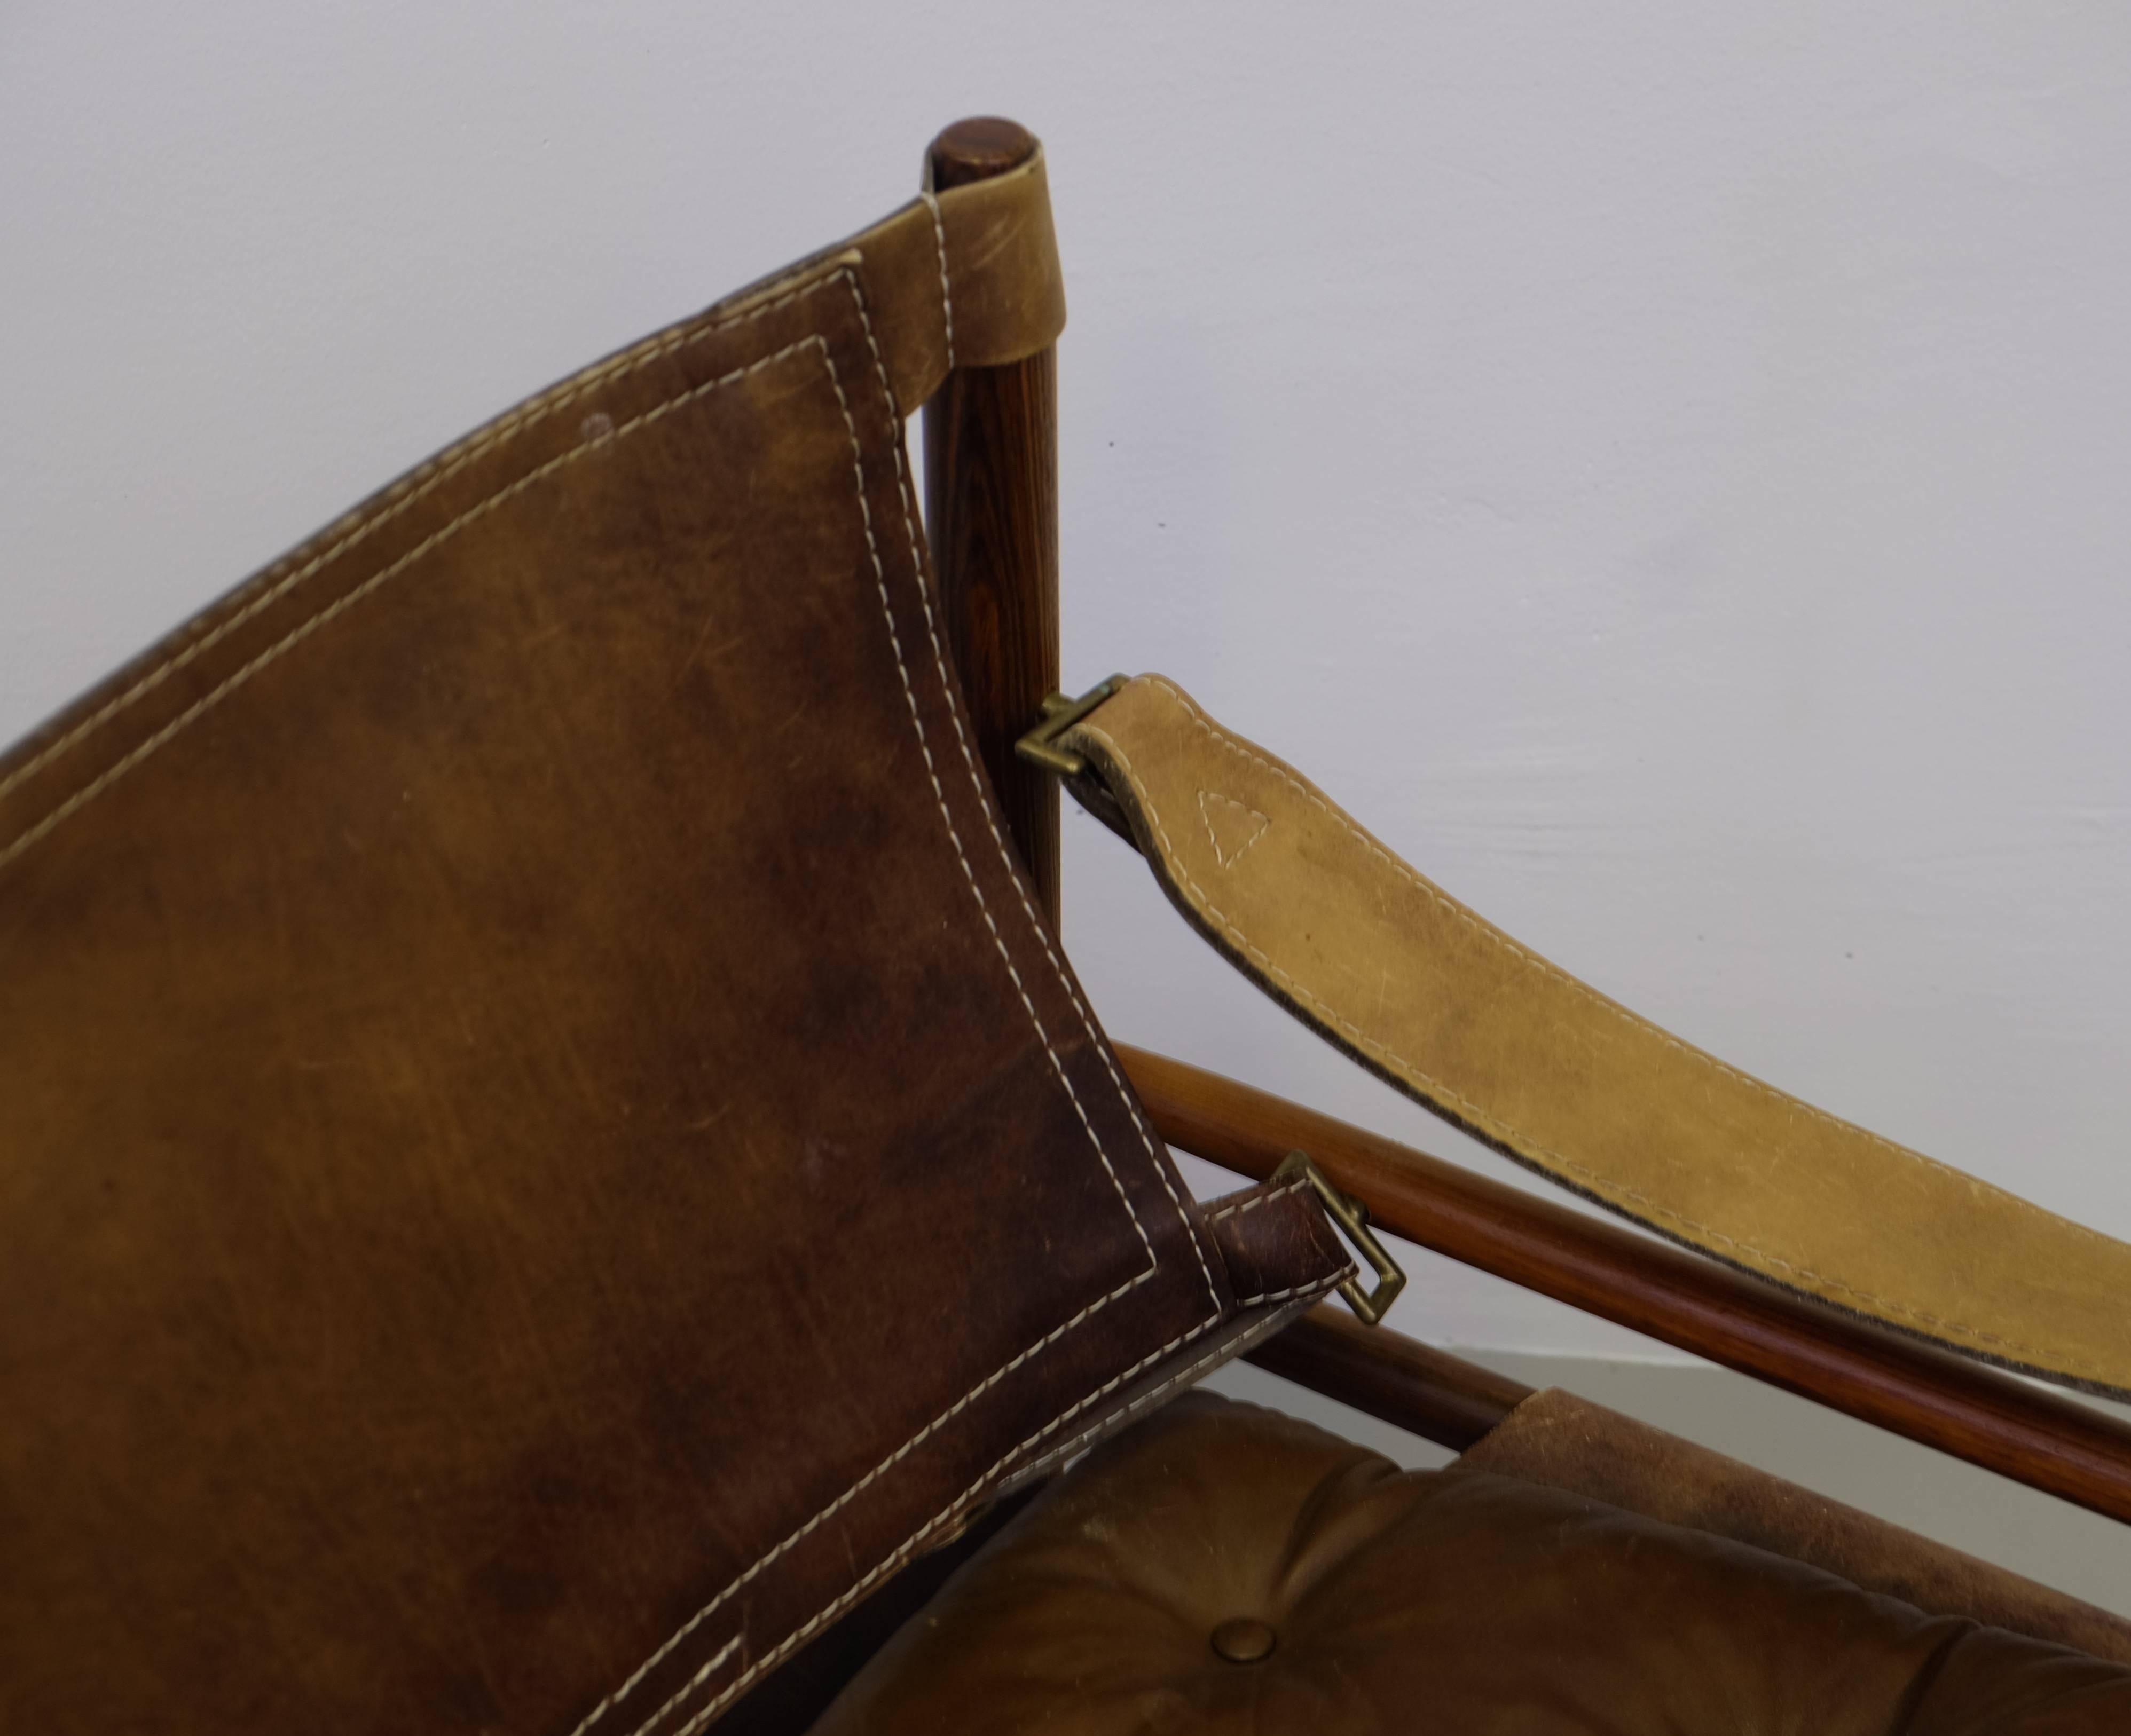 Fantastic safari chair in rosewood and brown leather. Designed by Arne Norell, produced by Arne Norell Möbel AB in Aneby, Sweden, 1960s.